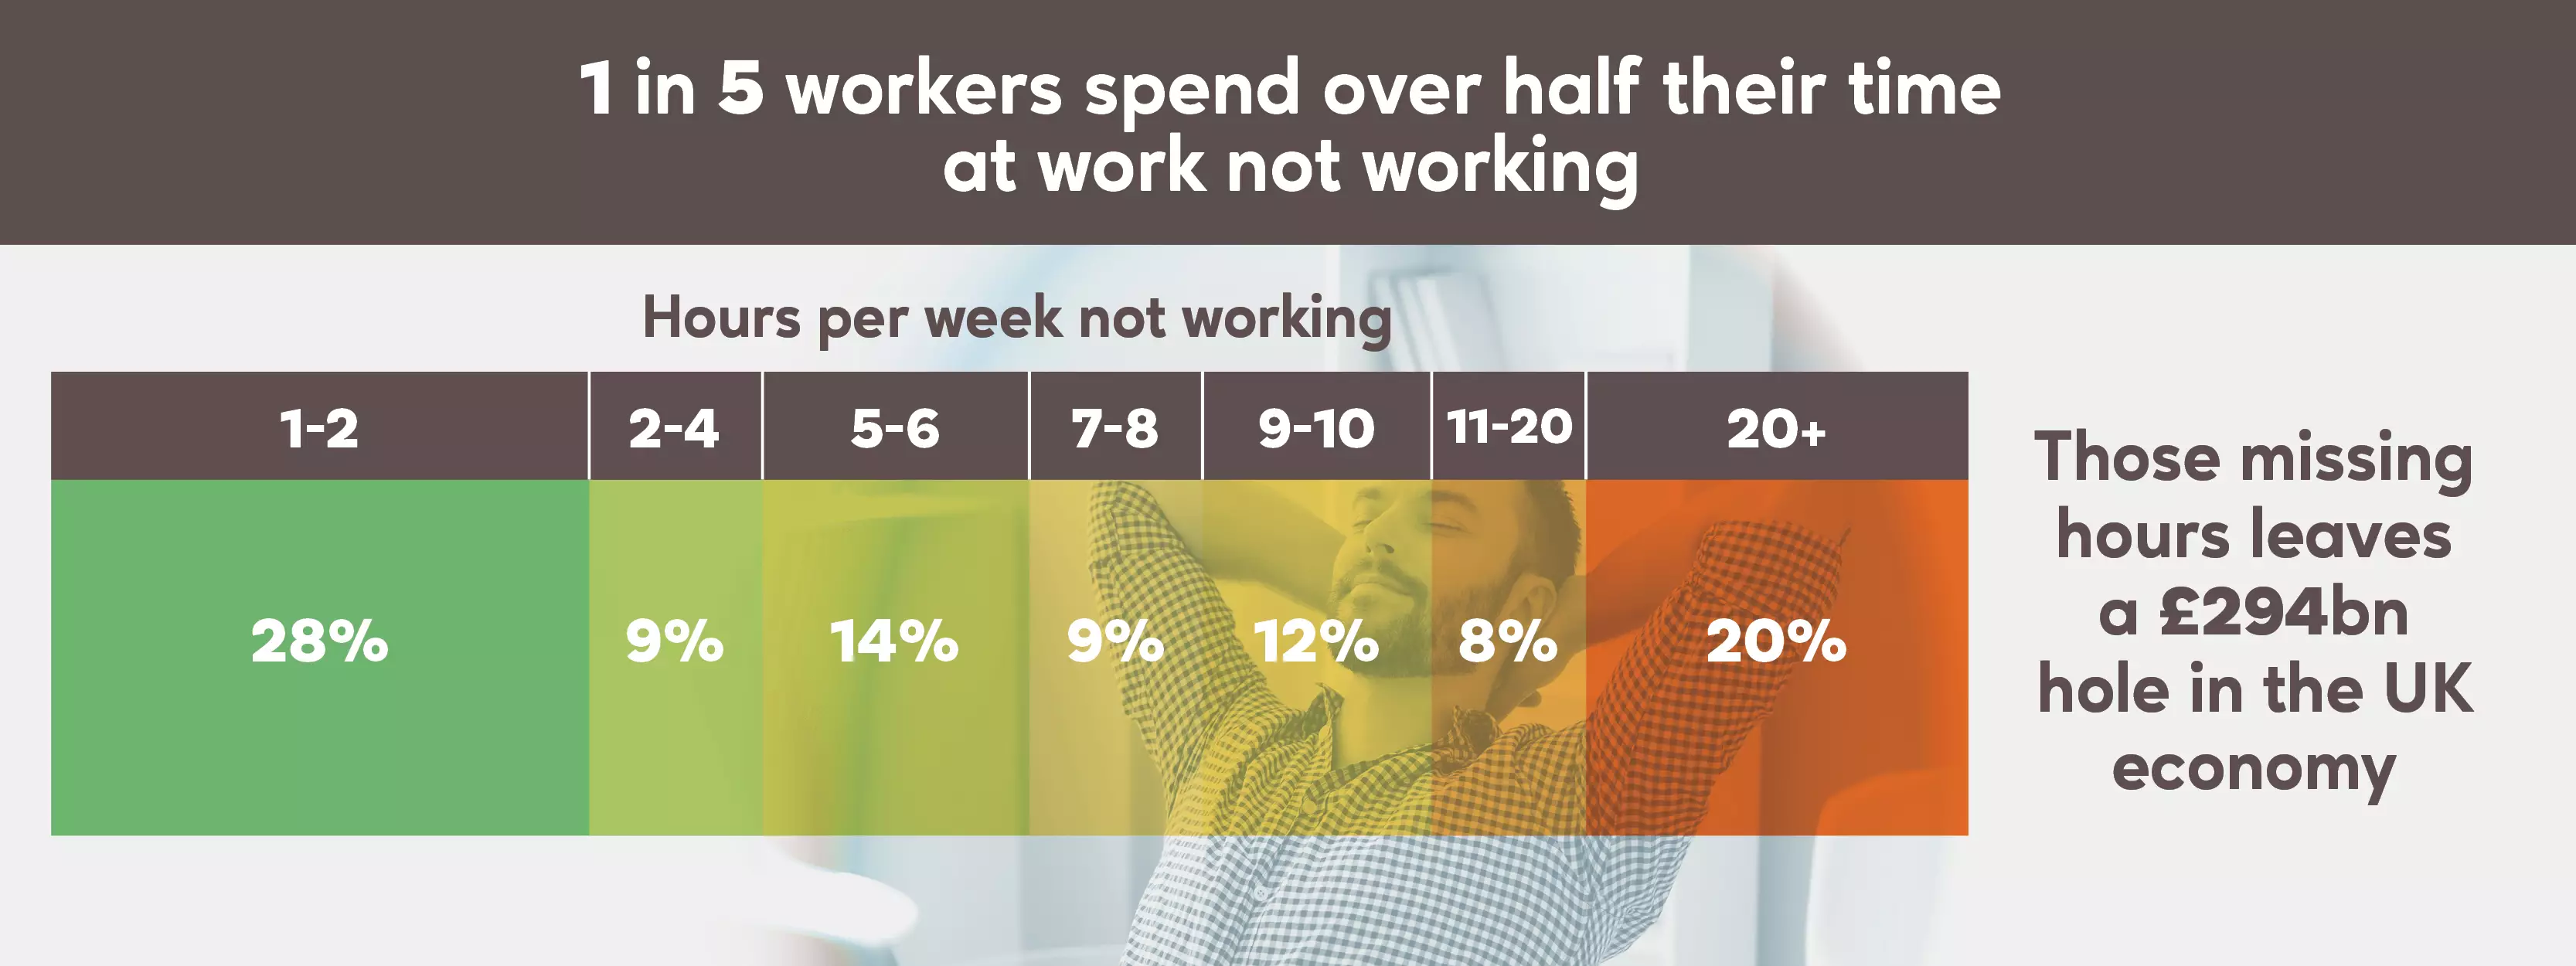 One in five workers spend over half their time not working (